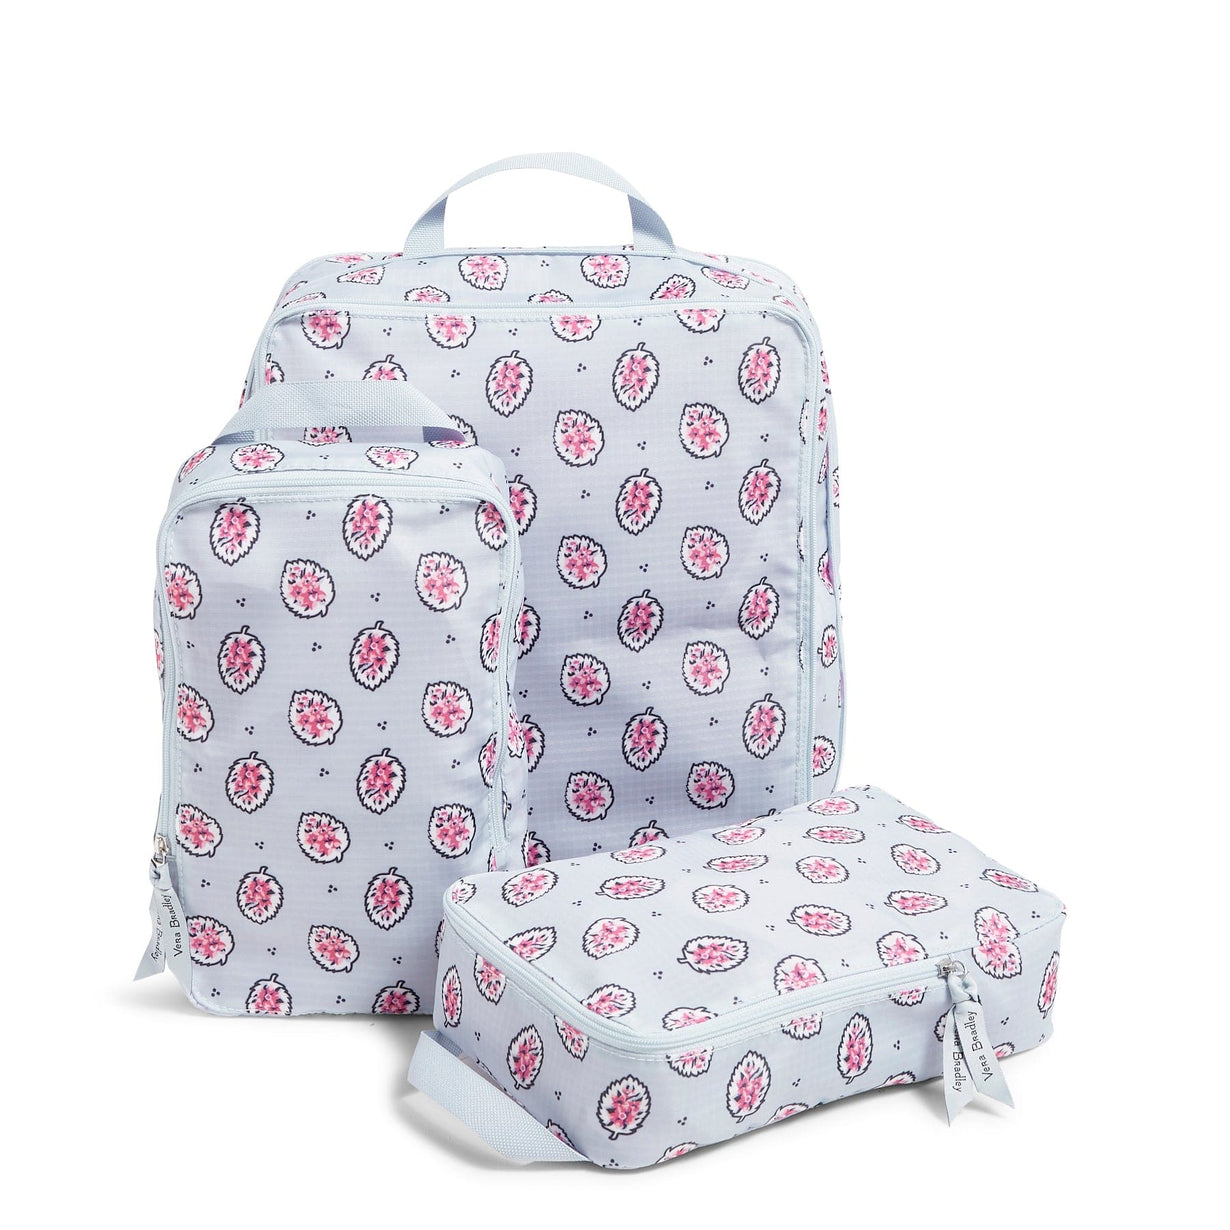 Set of 3 gray packing cubes with pink floral pattern